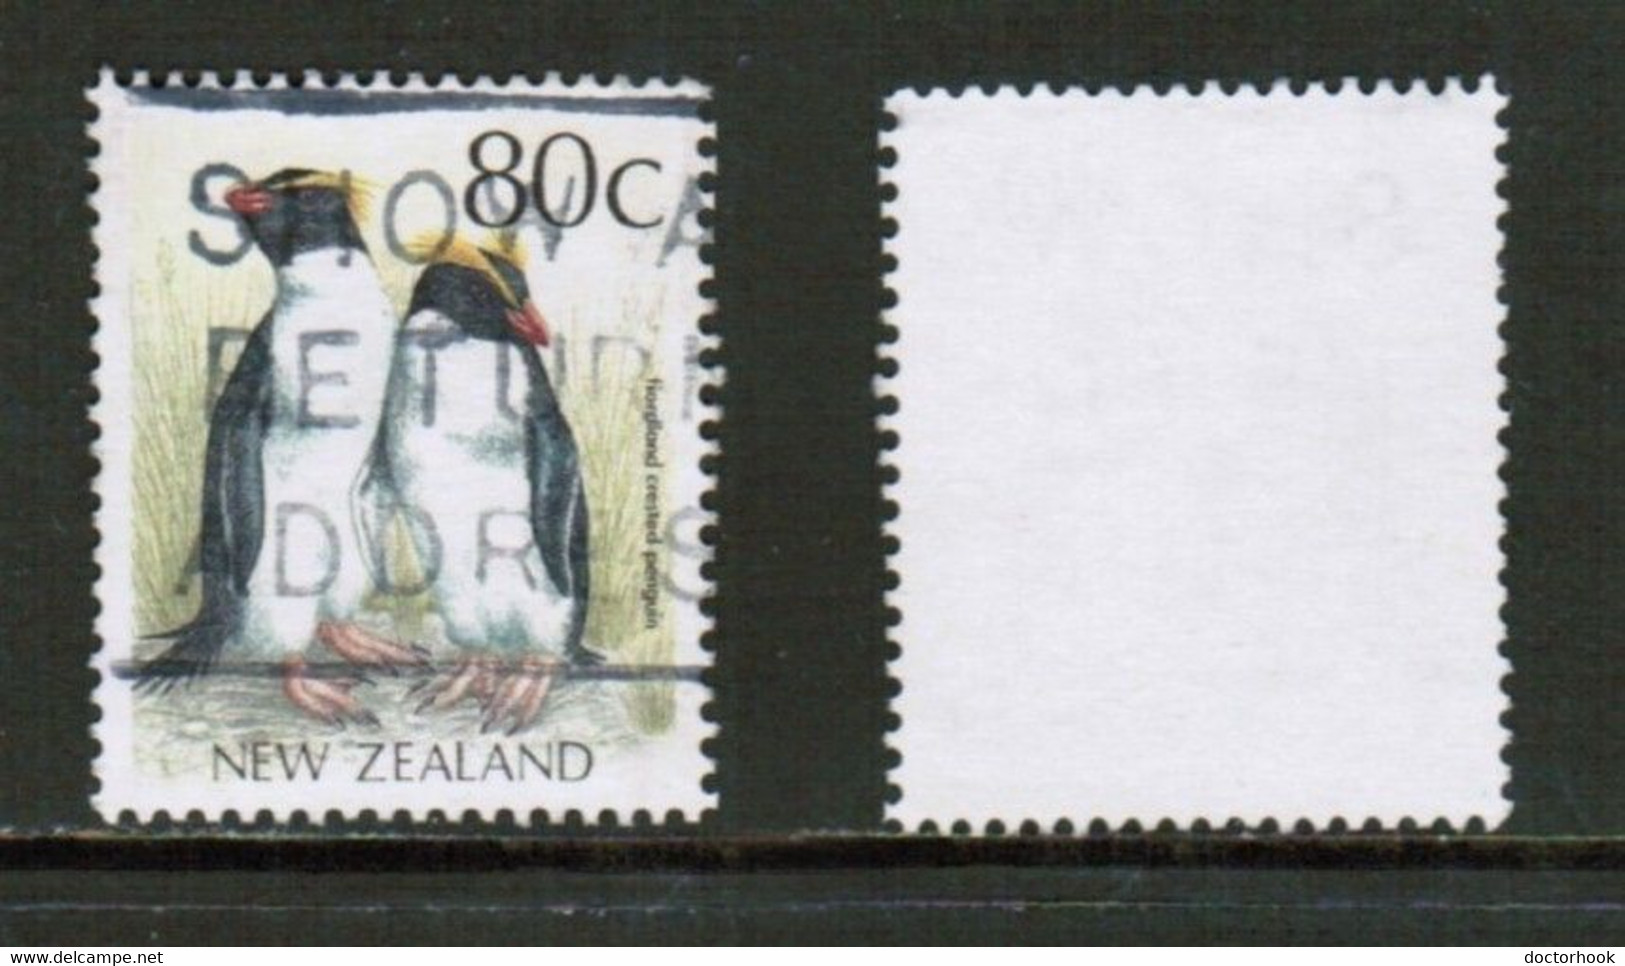 NEW ZEALAND   Scott # 925 USED (CONDITION AS PER SCAN) (WW-2-111) - Usati